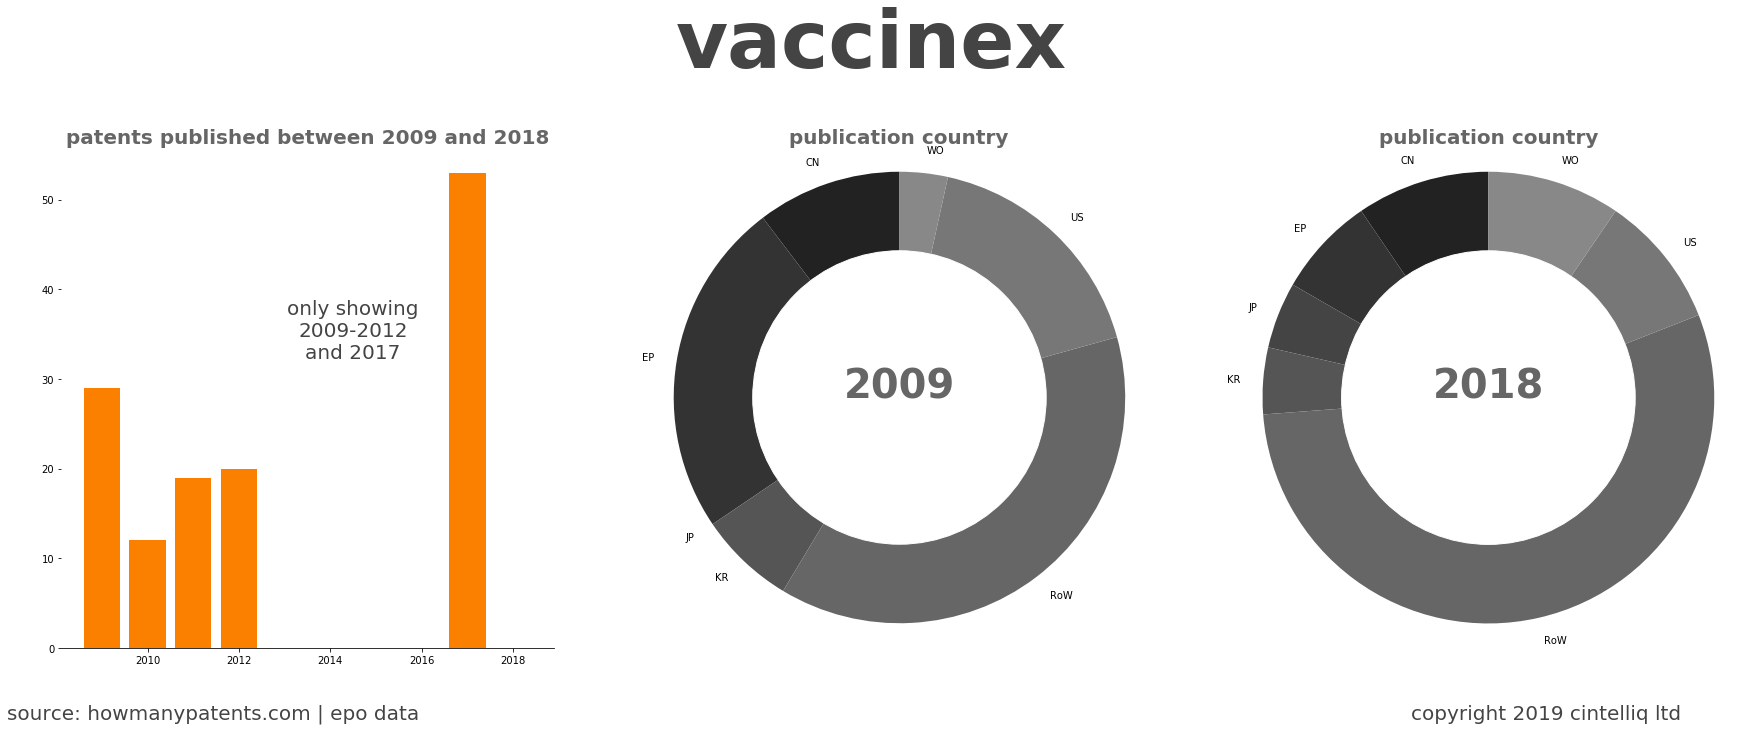 summary of patents for Vaccinex